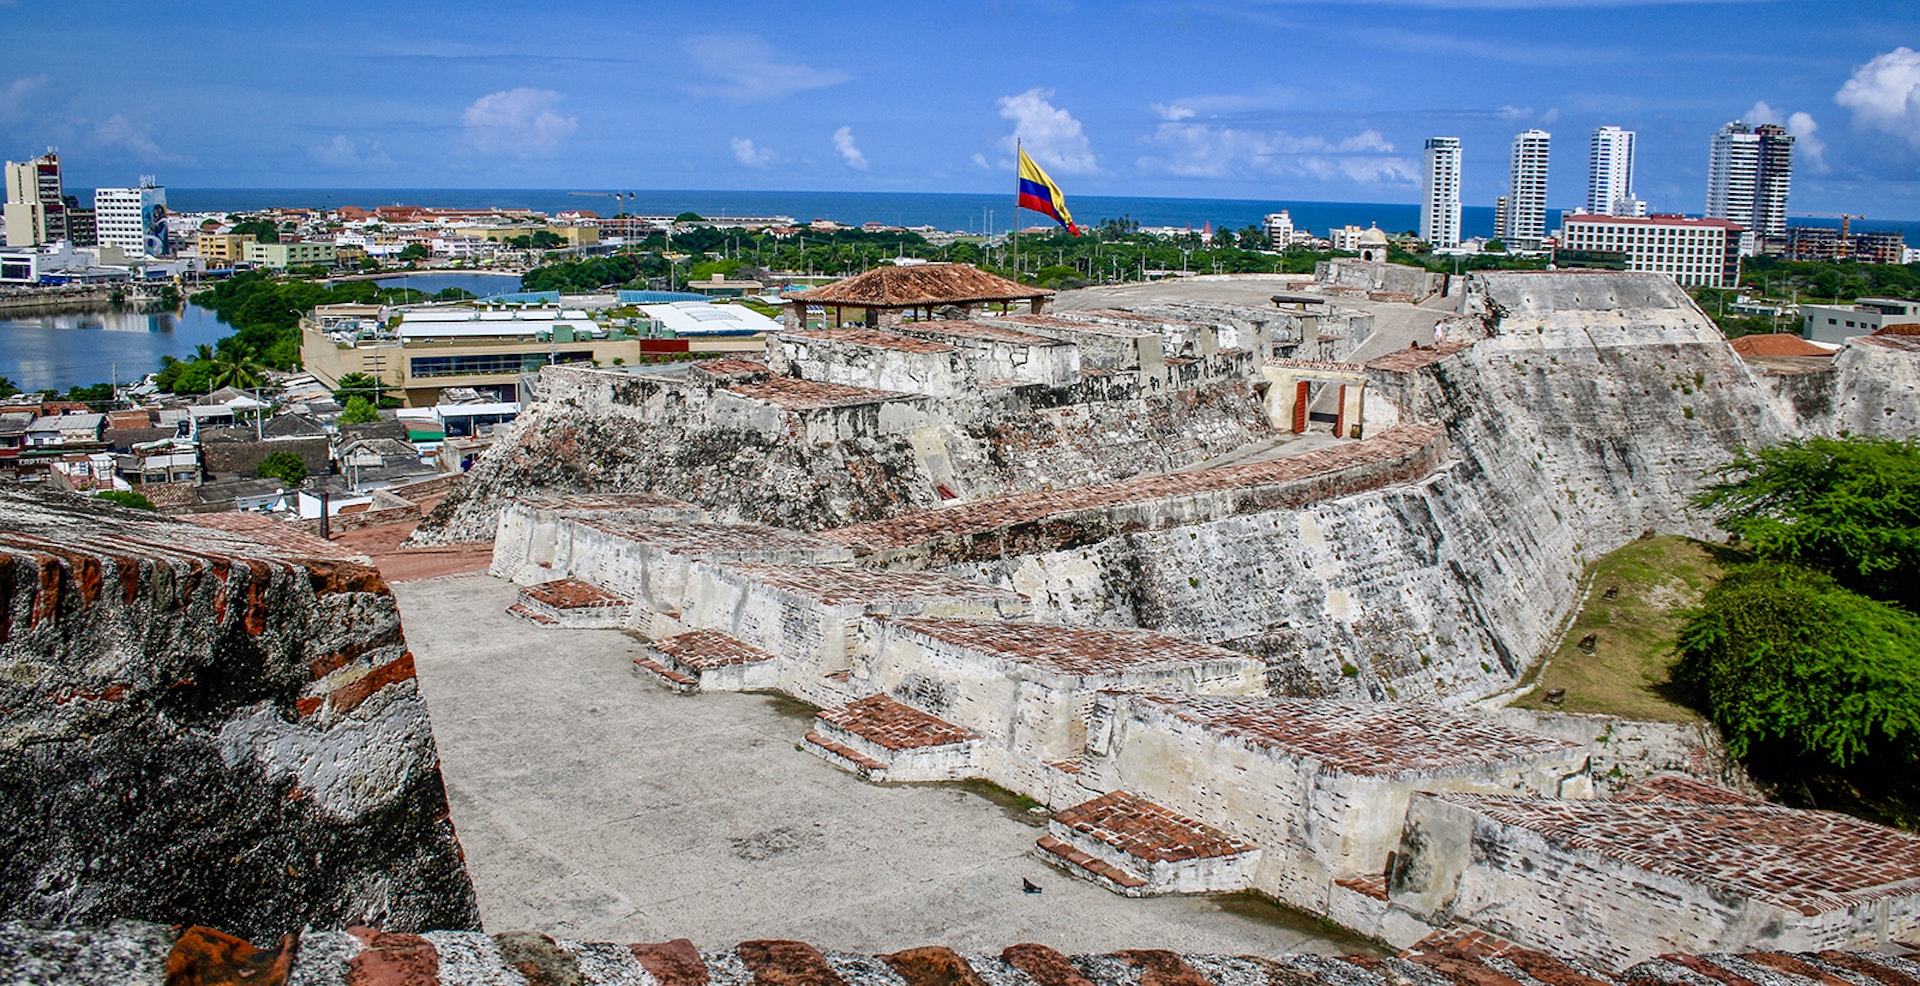 Spanish colonial fort surrounded by modern buildings in Cartagena © Jacqui de Klerk / Lonely Planet